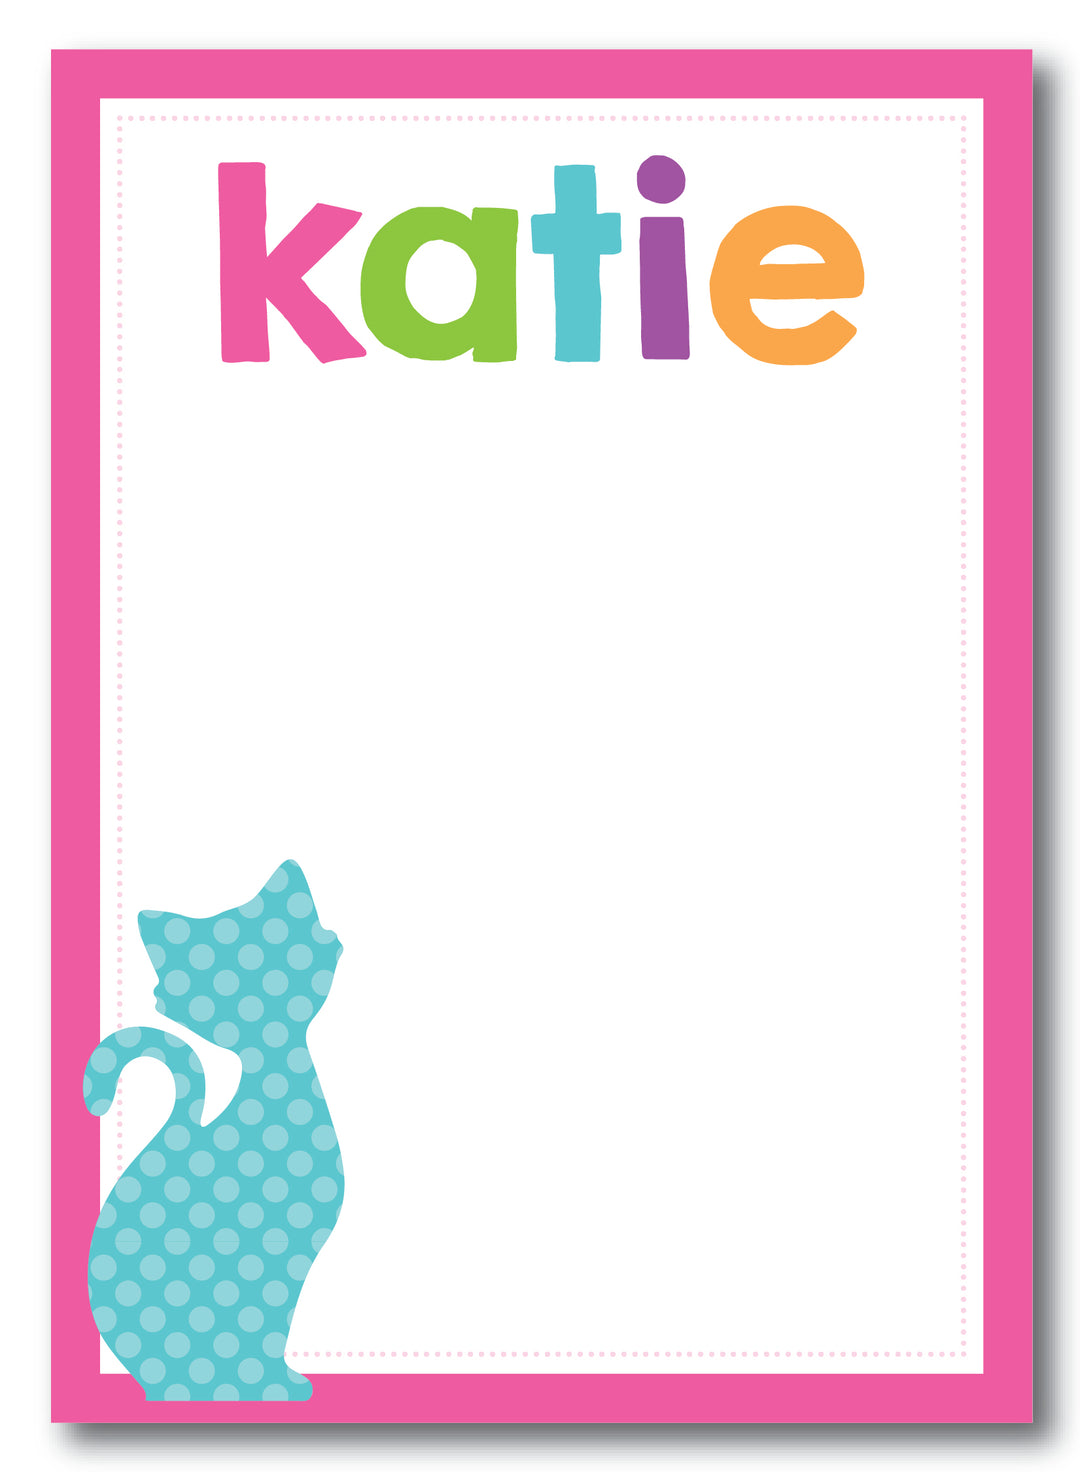 The Katie Notepad